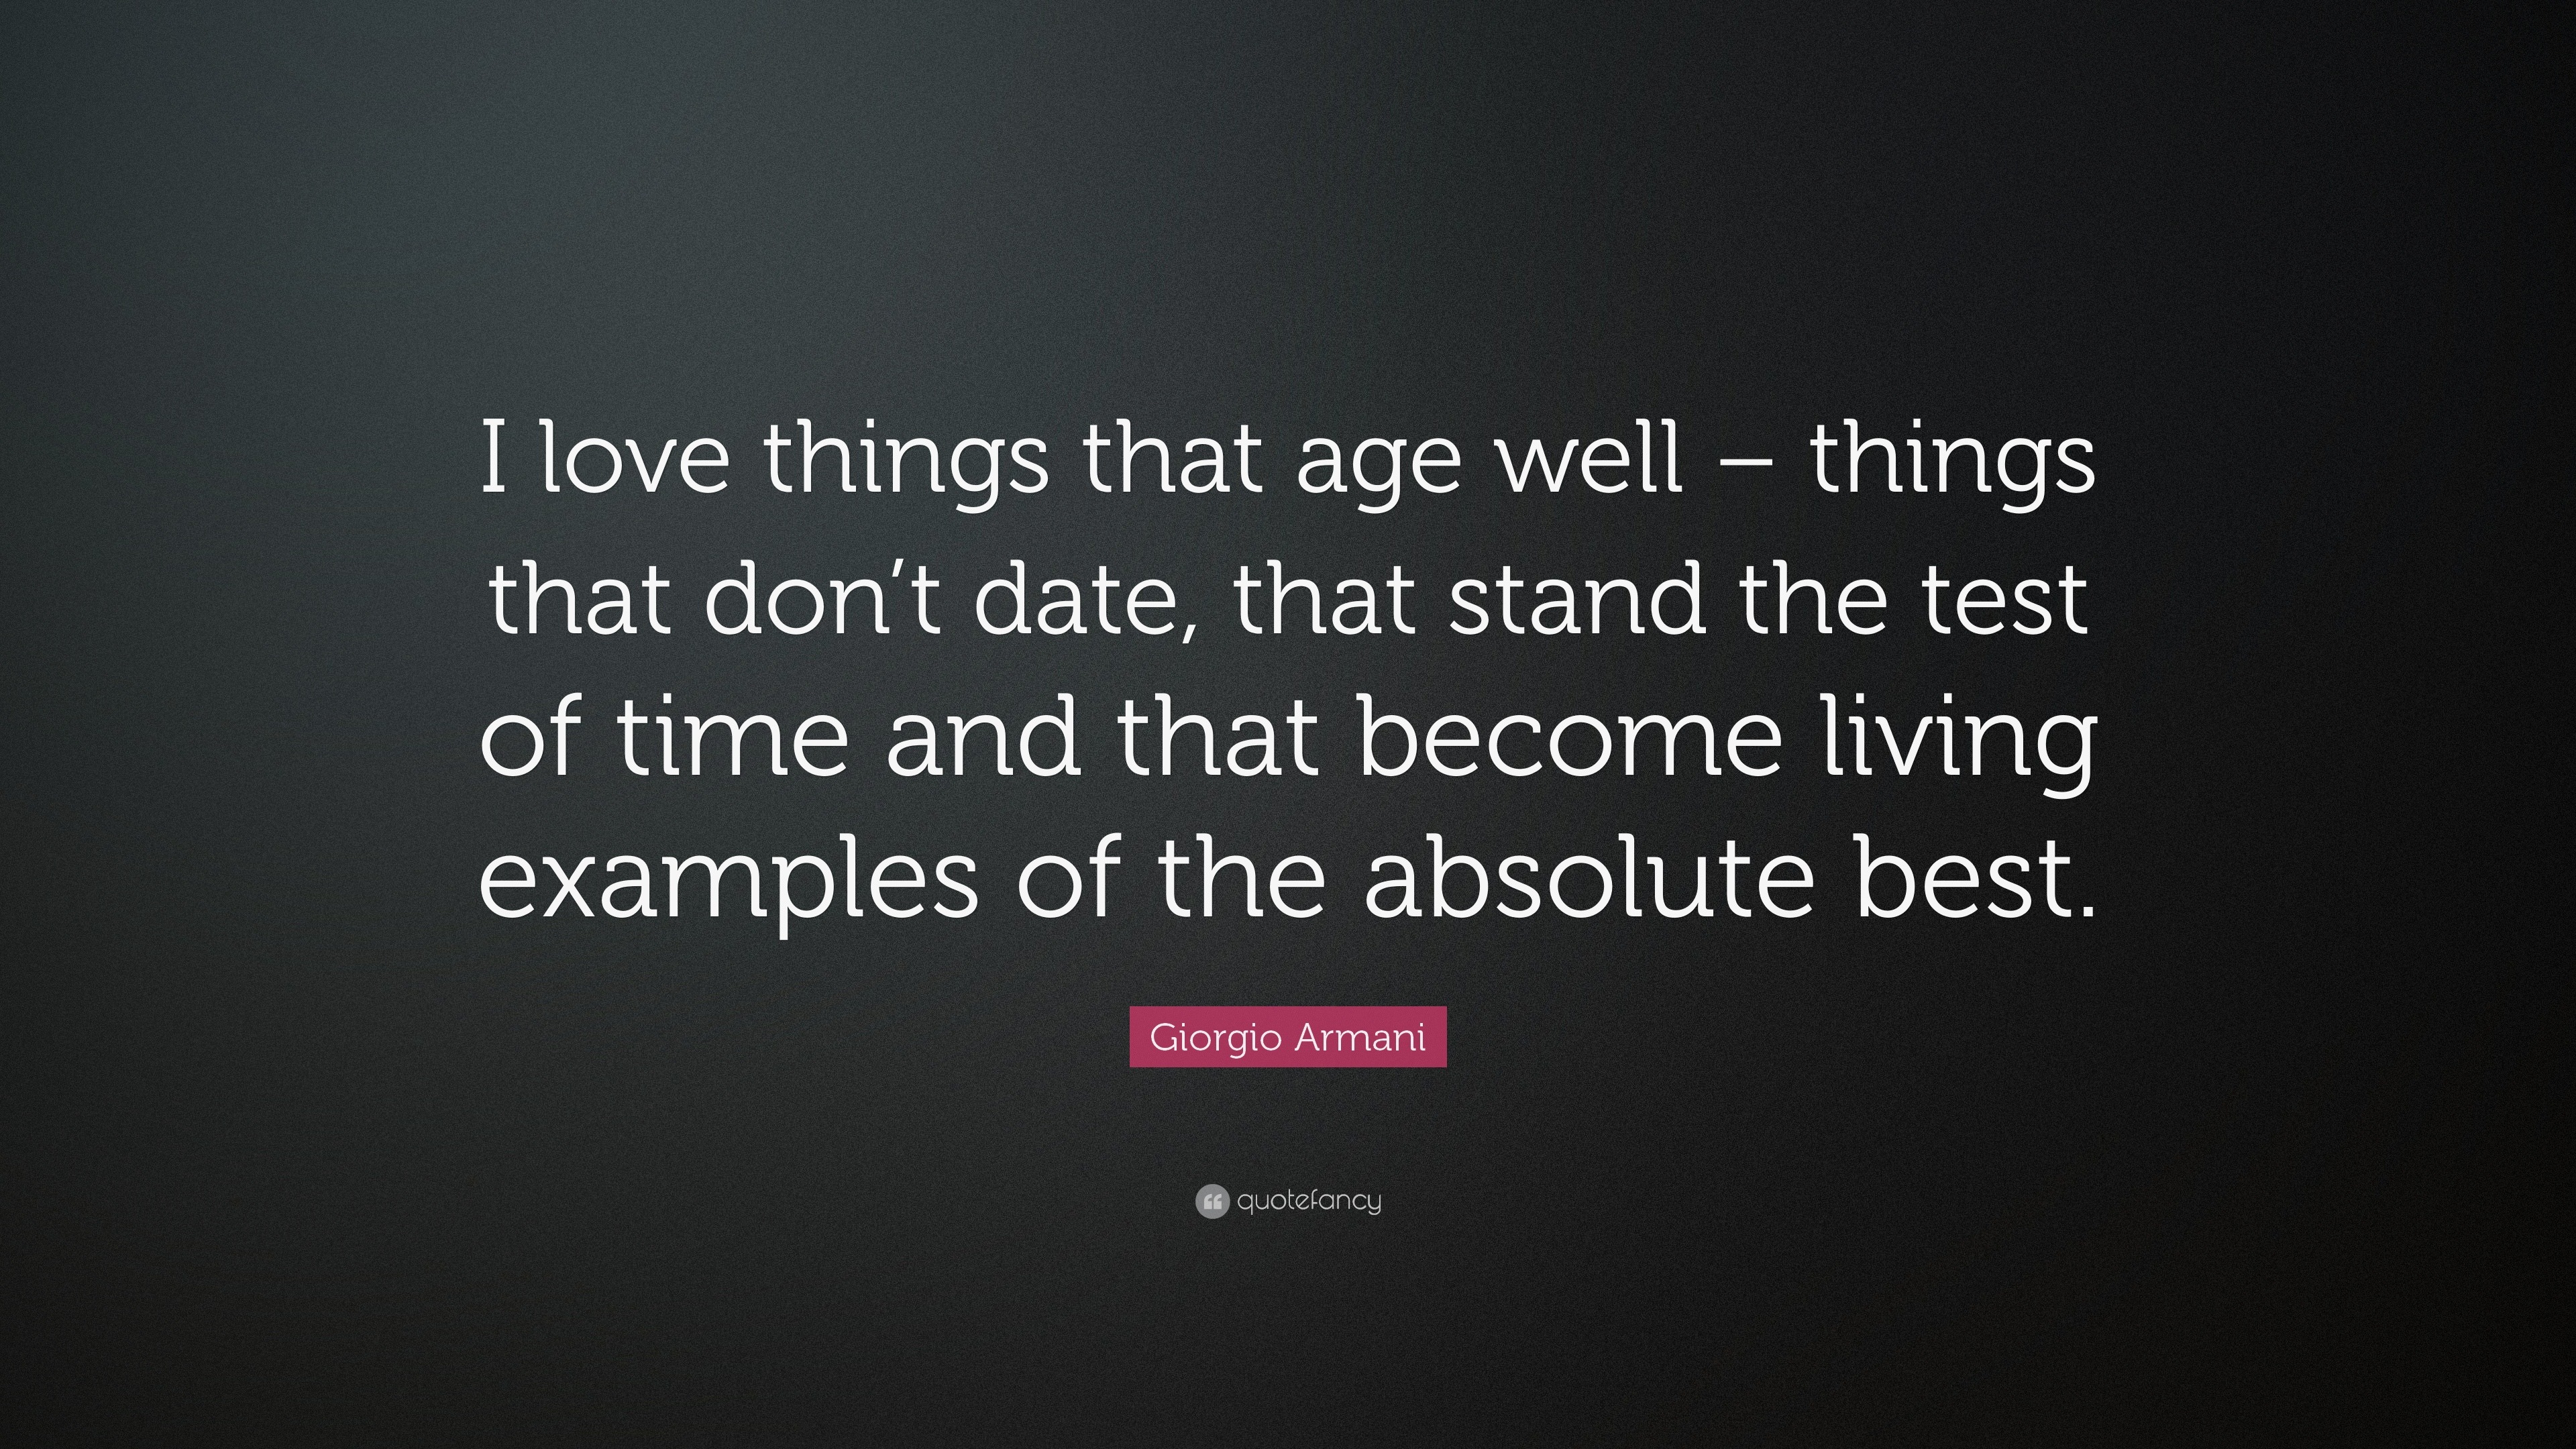 Giorgio Armani Quote: “I love things that age well – things that don't  date, that stand the test of time and that become living examples of the...”